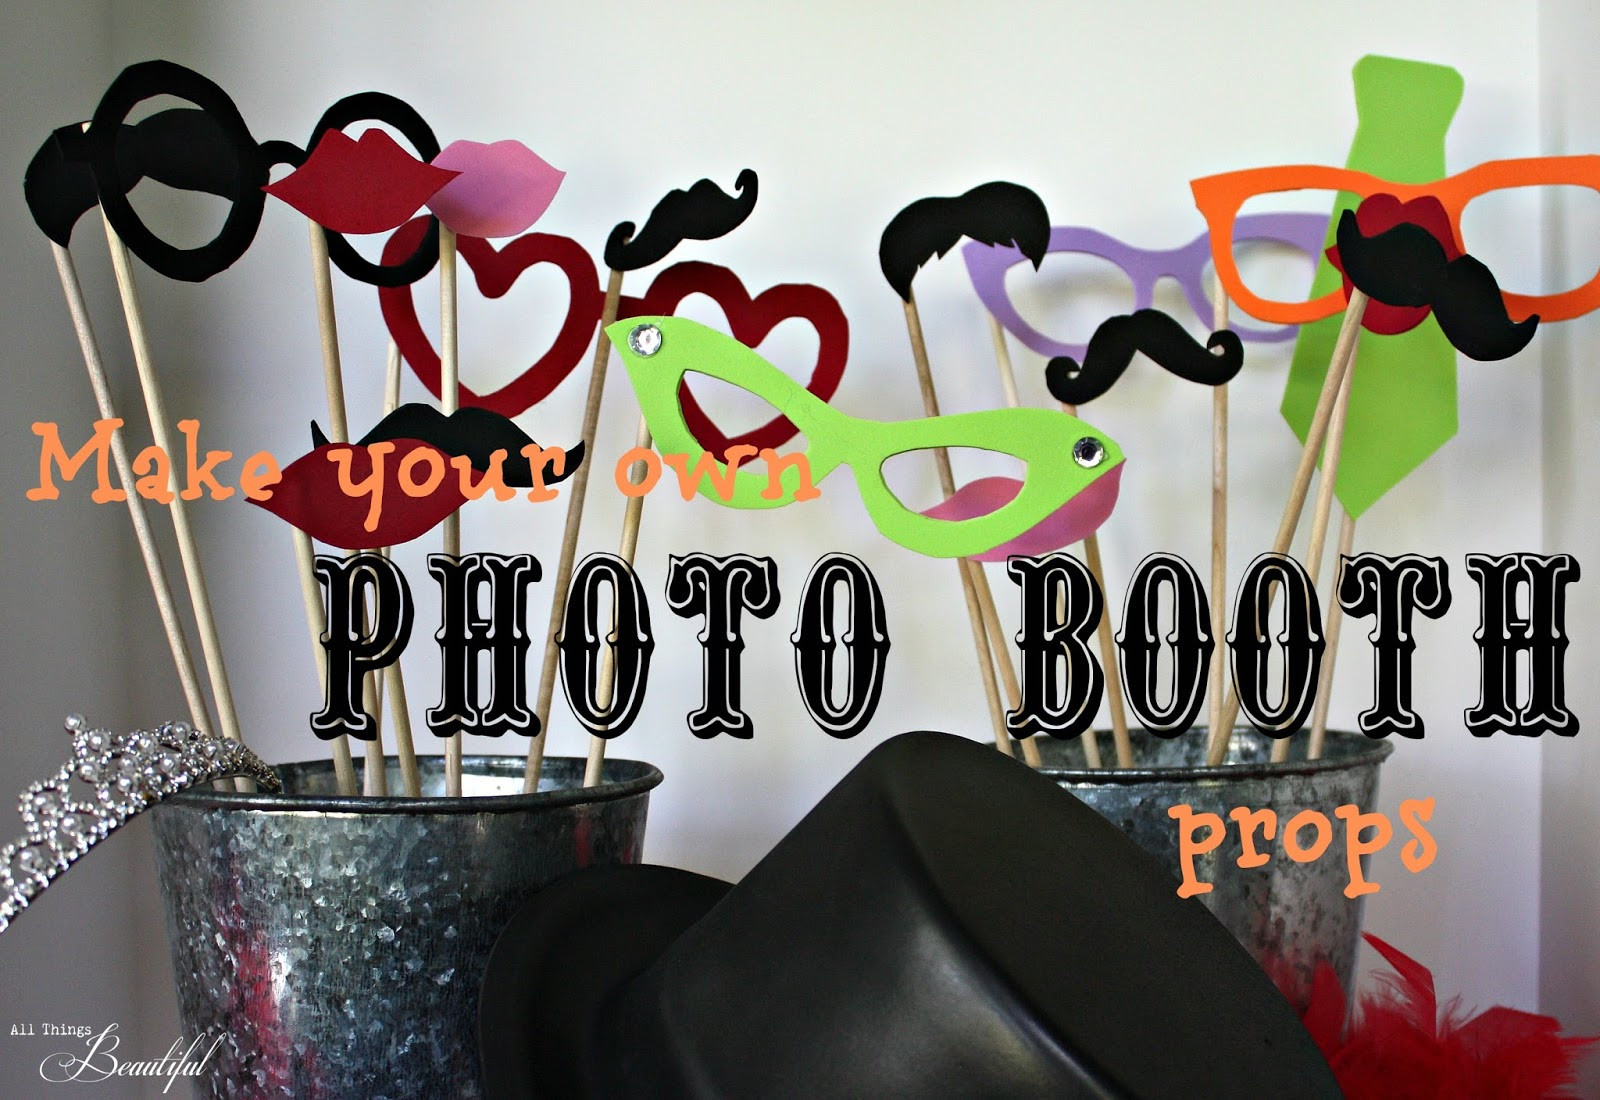 Photo Booth Ideas For Birthday Party
 All Things Beautiful Booth Teen Birthday Party